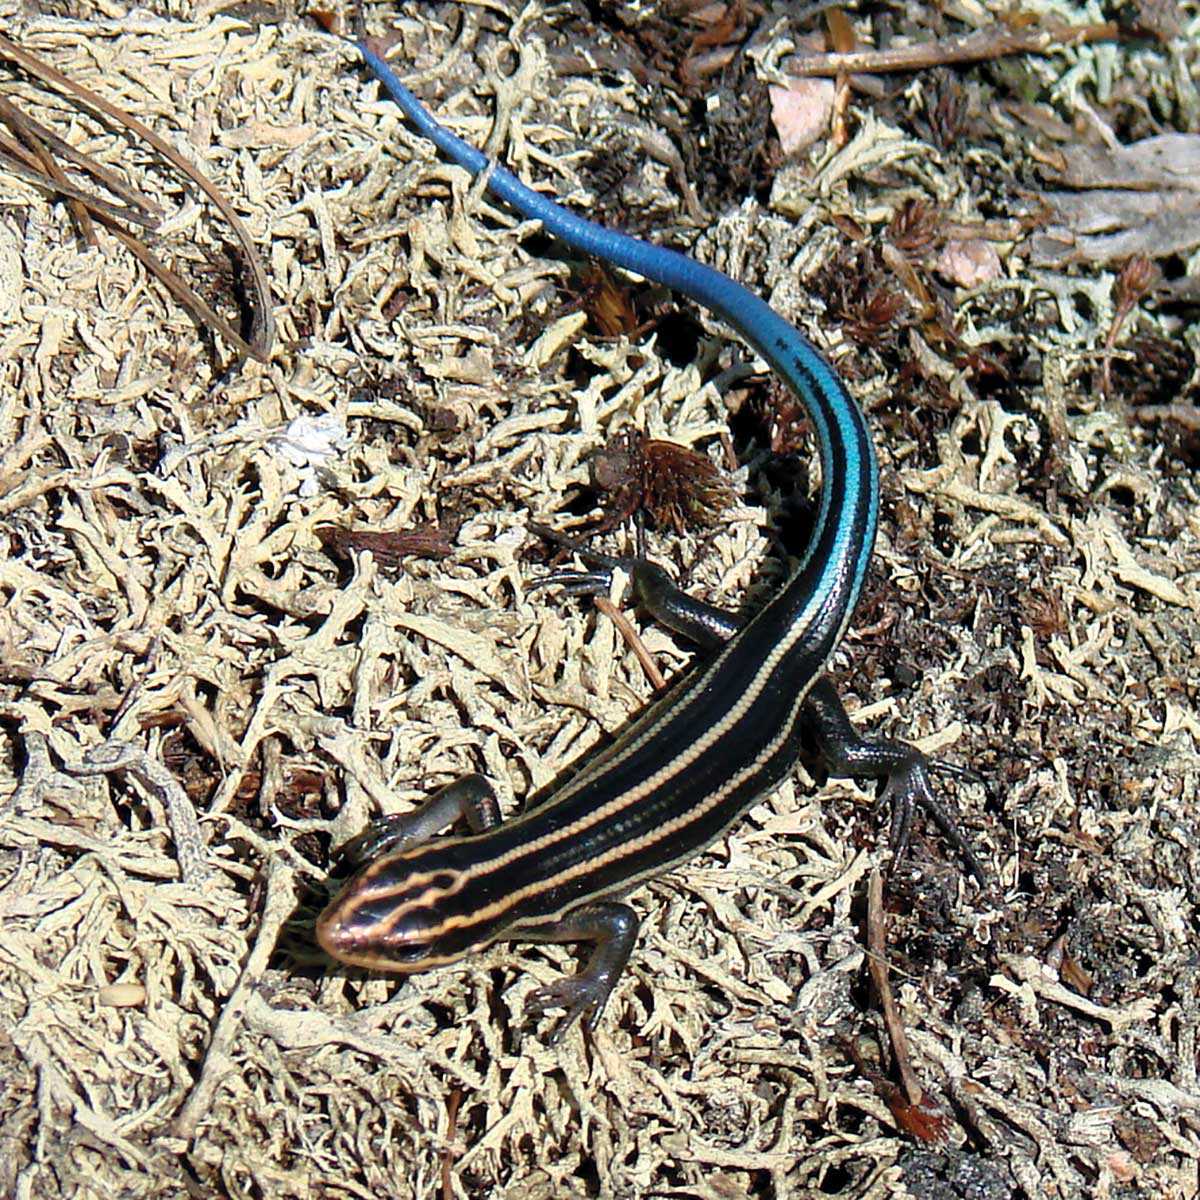 The common five-lined skink (Plestiodon fasciatus), Ontario’s only lizard, is provincially and nationally threatened.